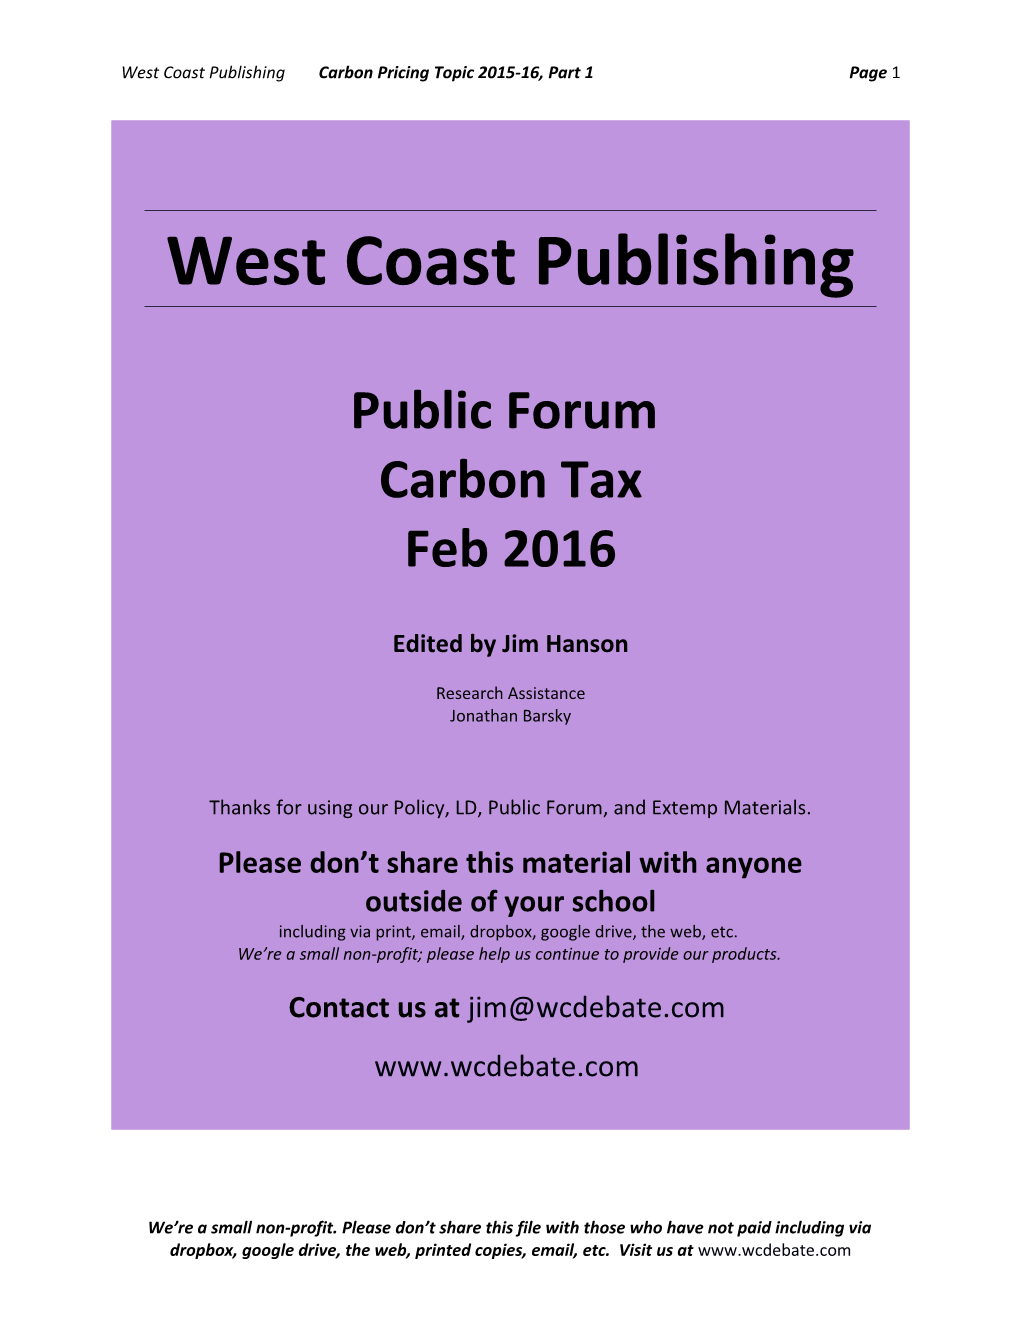 West Coast Publishing Carbon Pricing Topic 2015-16, Part 1 Page 2